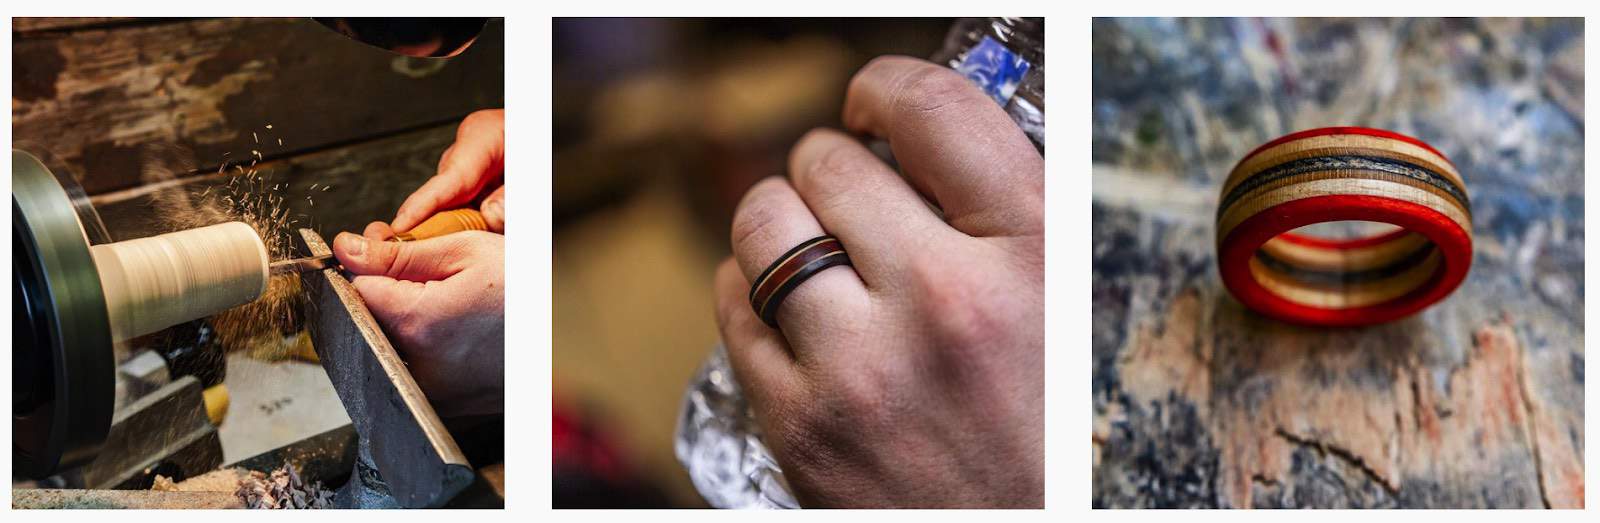 Aviary Ring | Hand-turned wooden rings | Jewelry brands featured on Afluencer